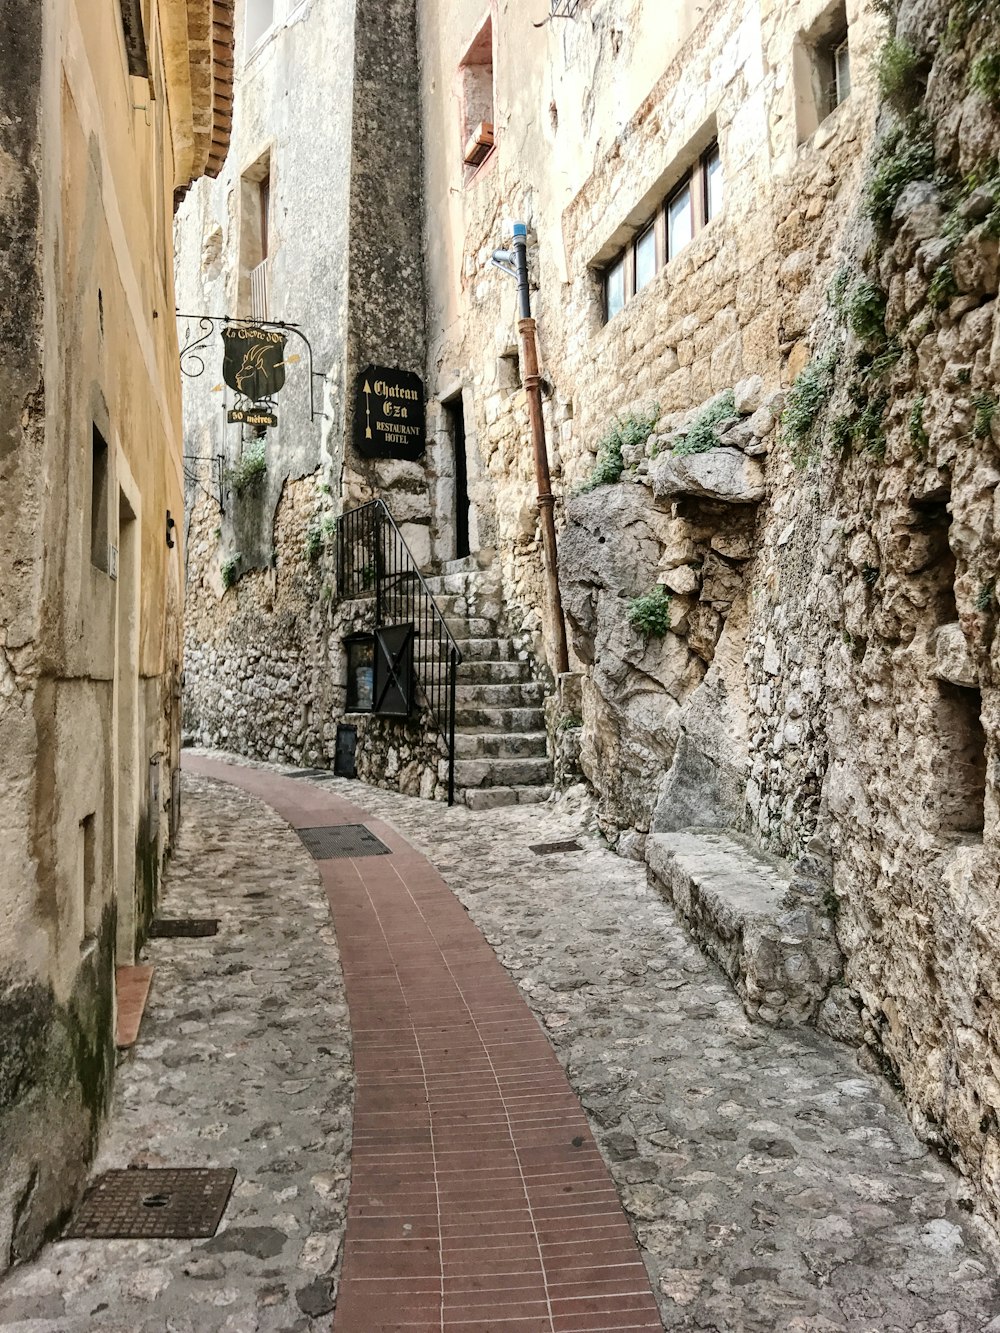 a narrow street with stone buildings and a brick walkway